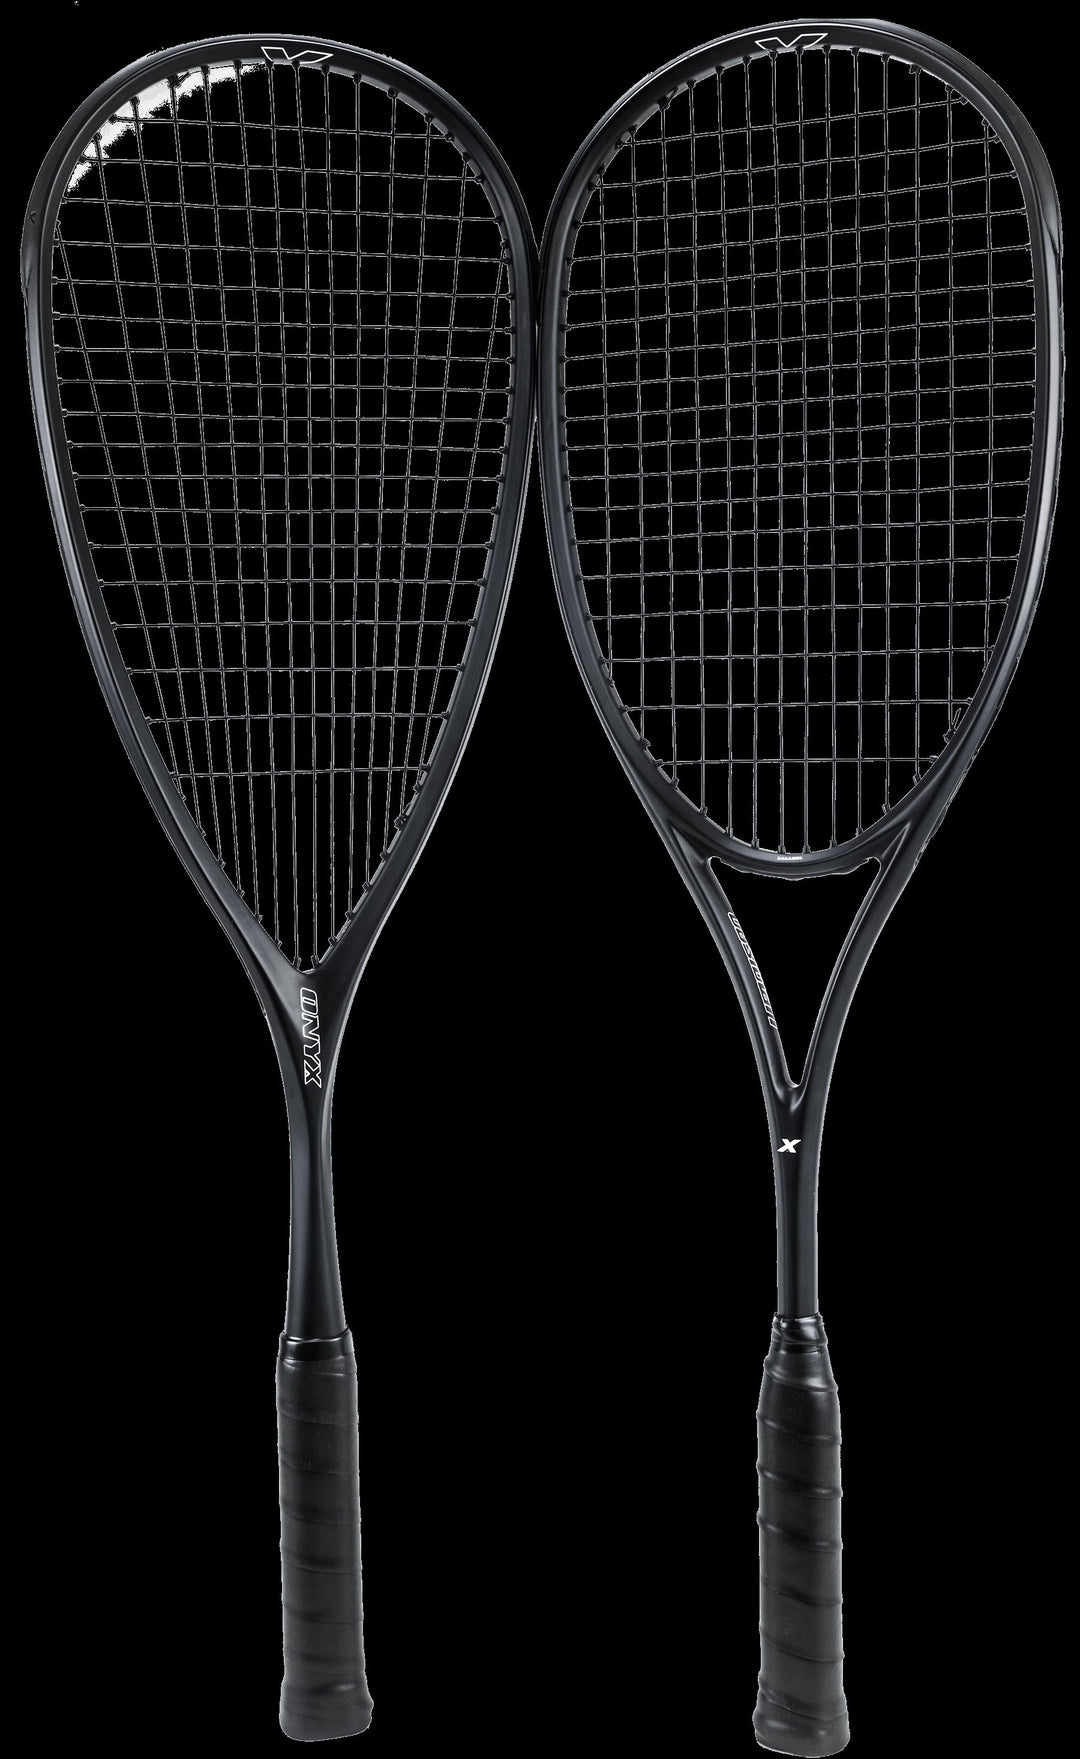 Get 2 racquets for less